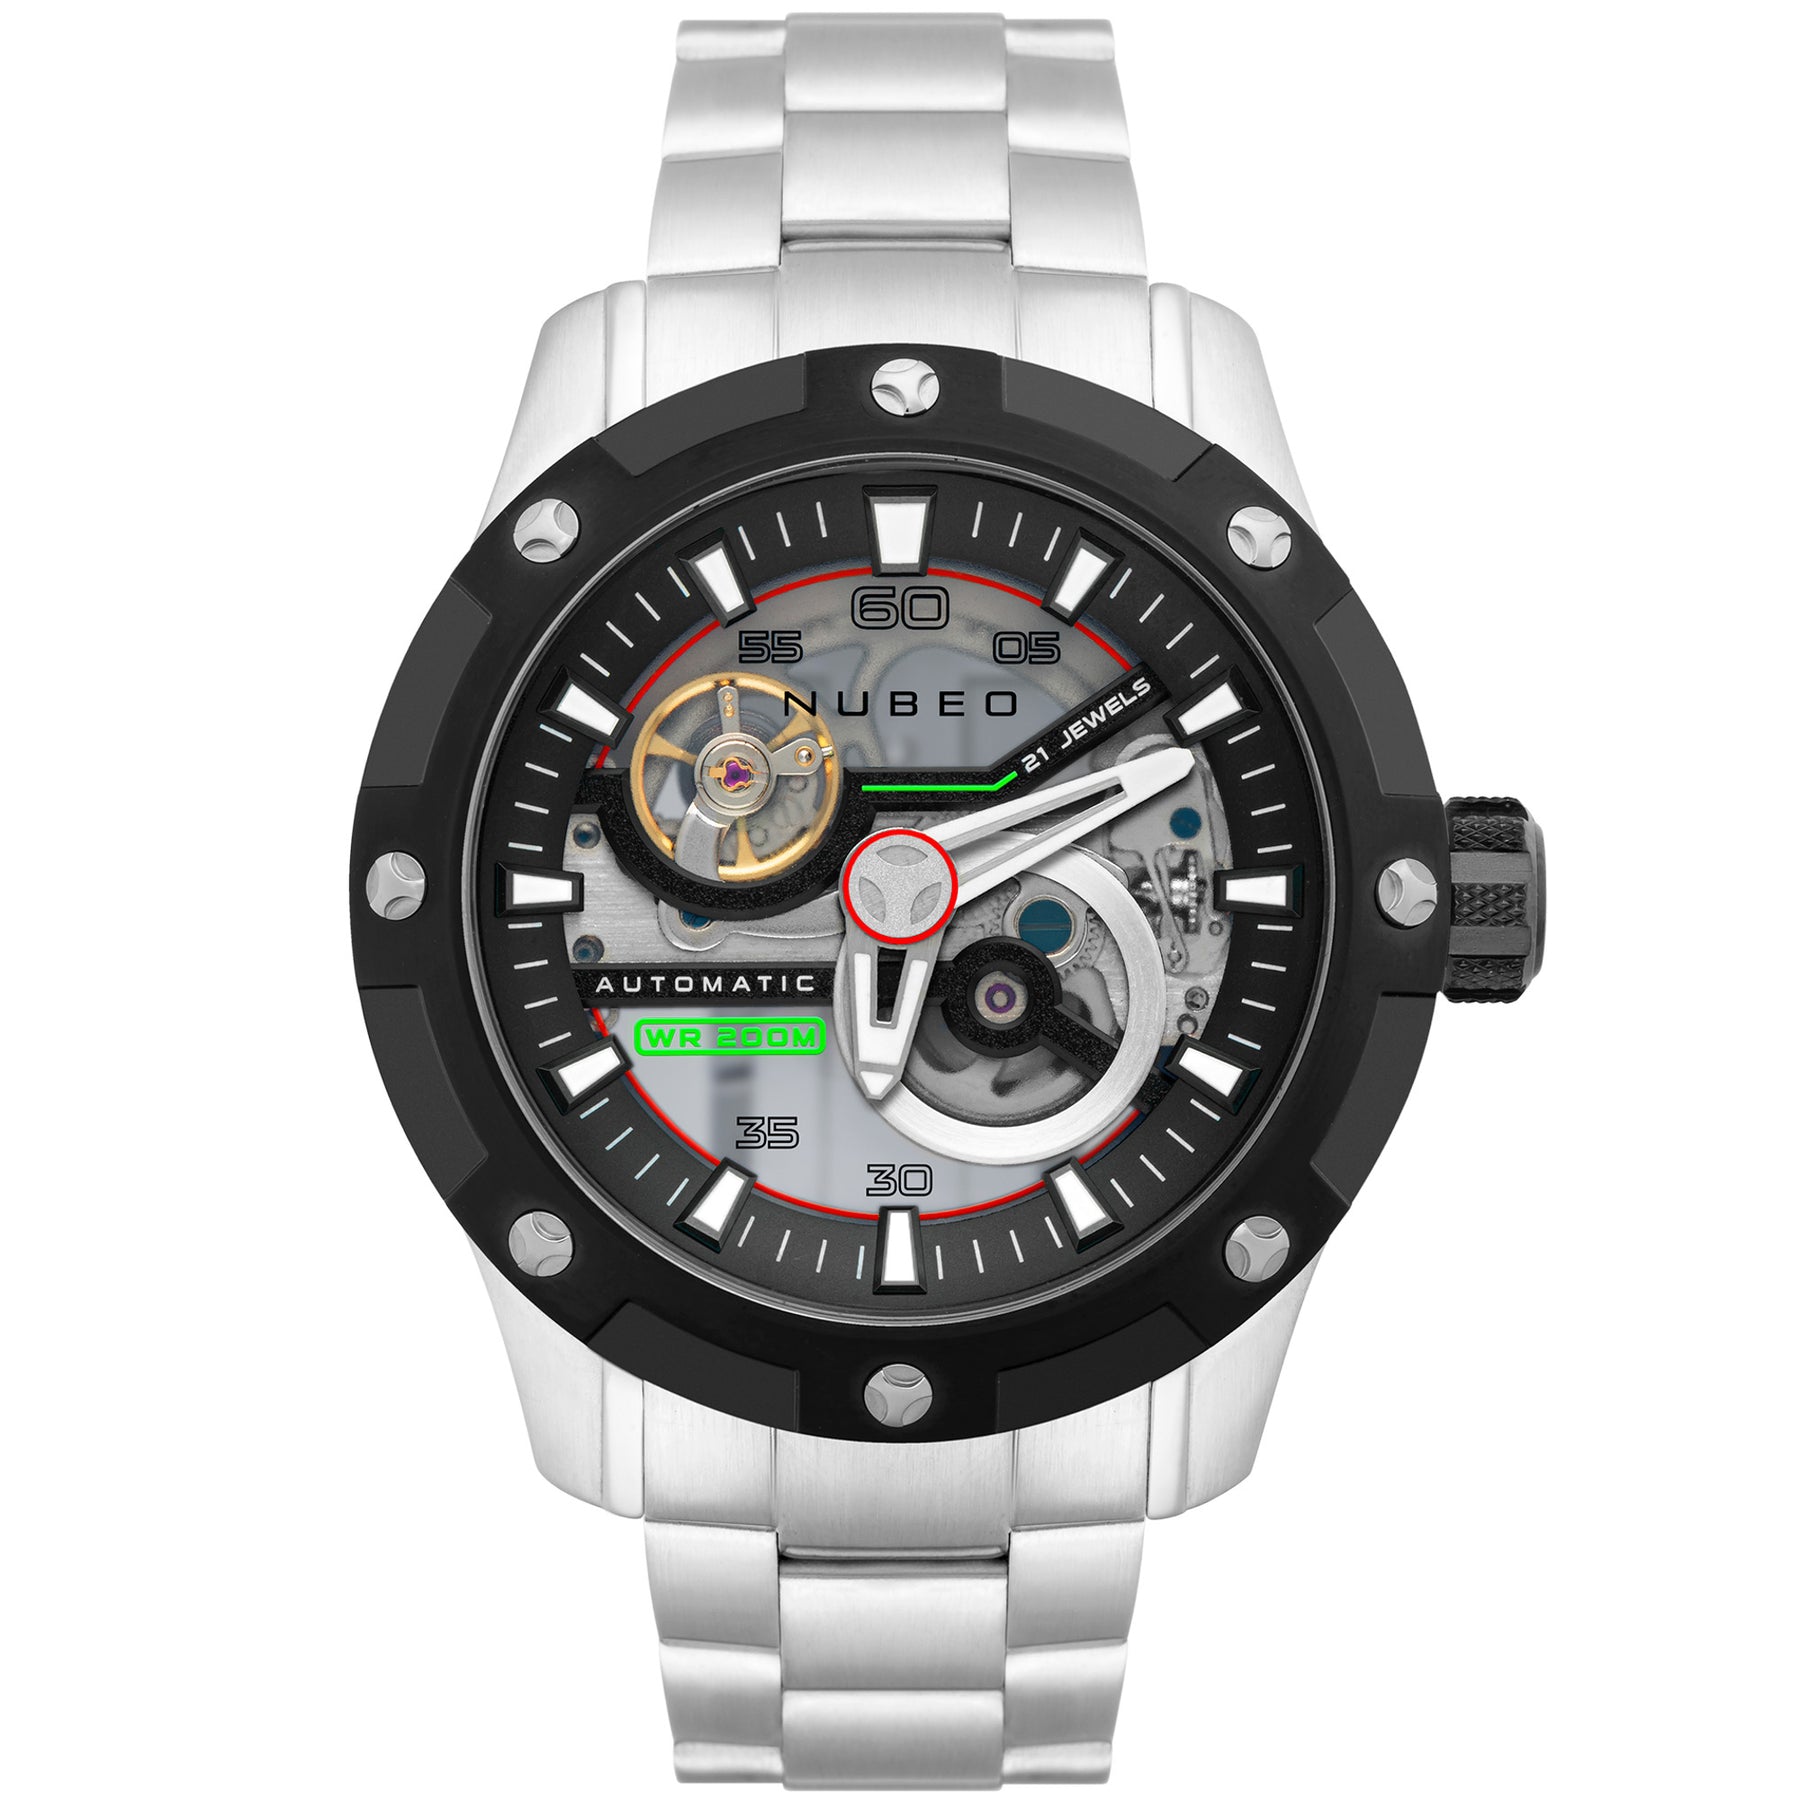 Dublin Pionier GM-508-3 Made in Germany – Pionier Watches